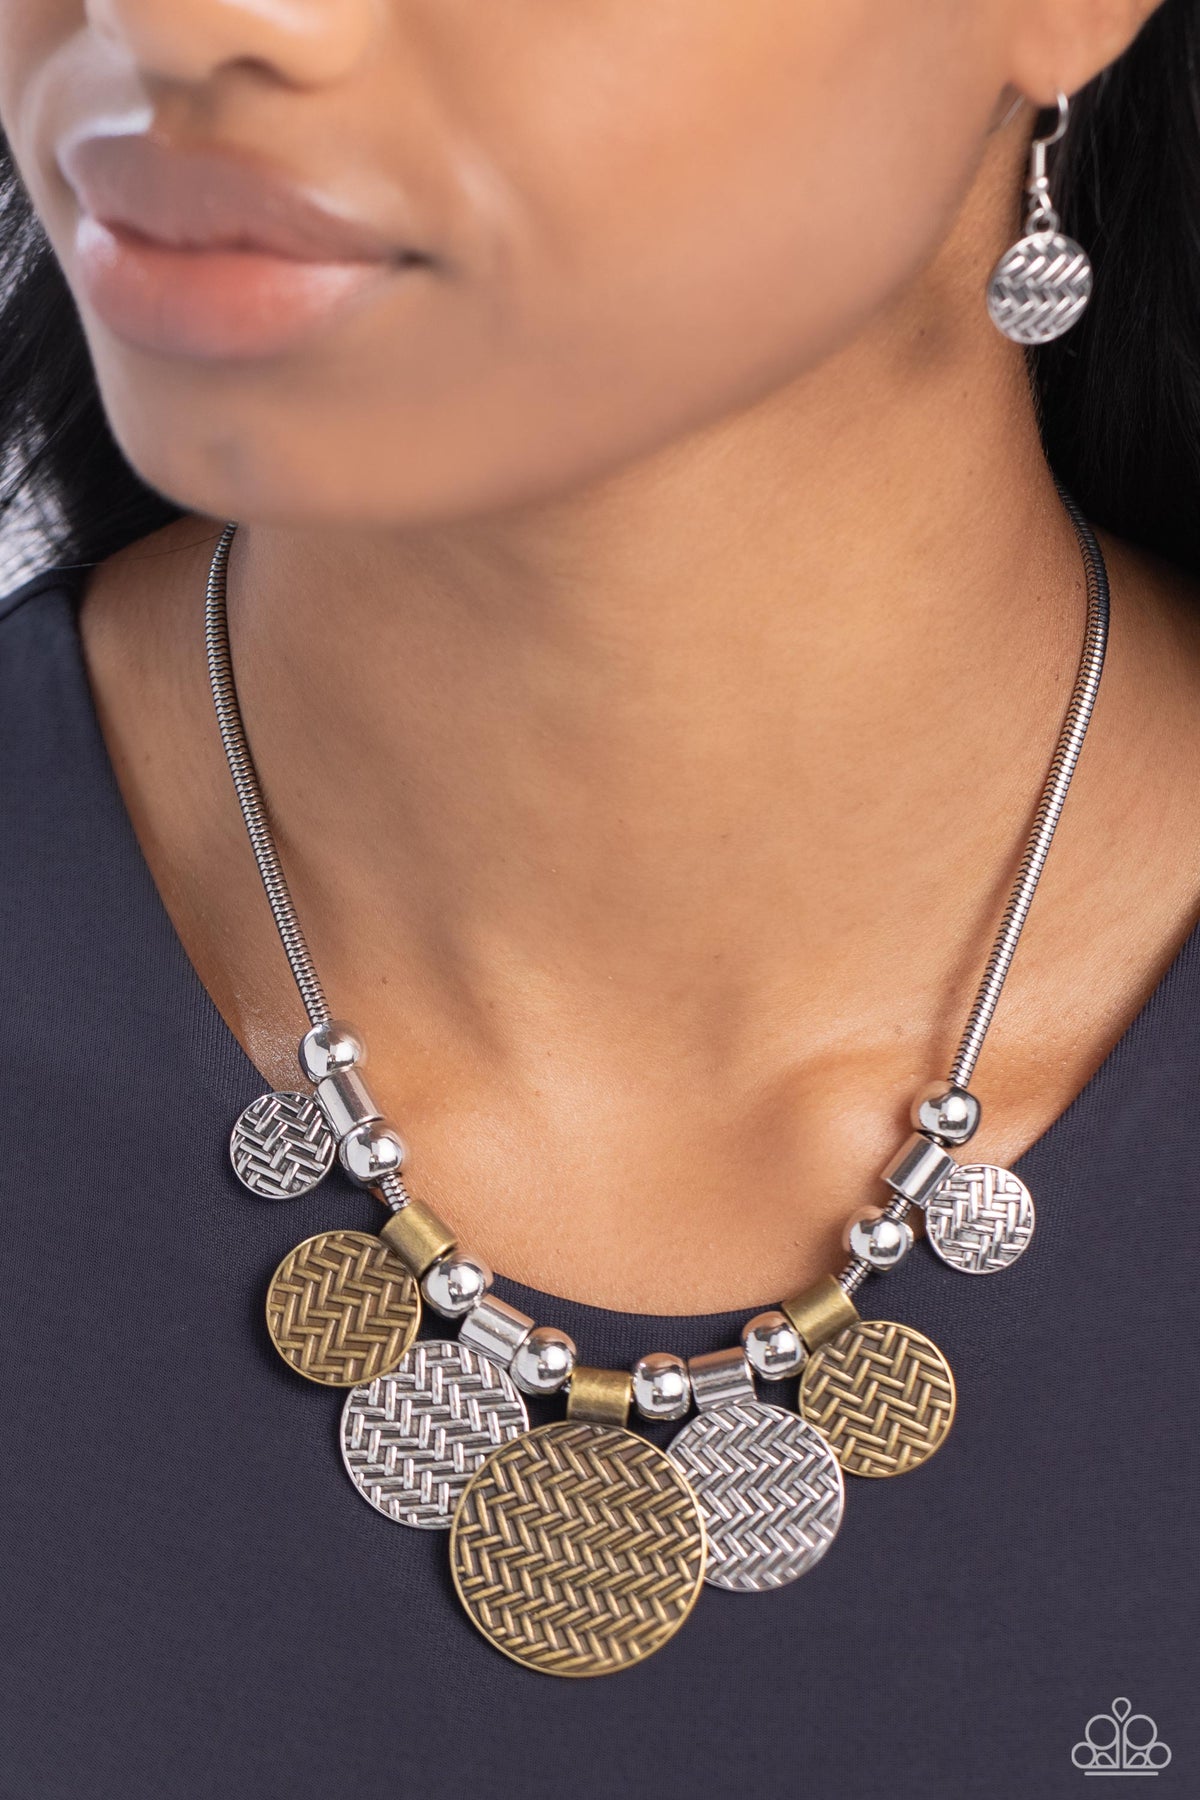 Urban Multi Metal - Necklace Boutique - Indigenously Chic Jewelry